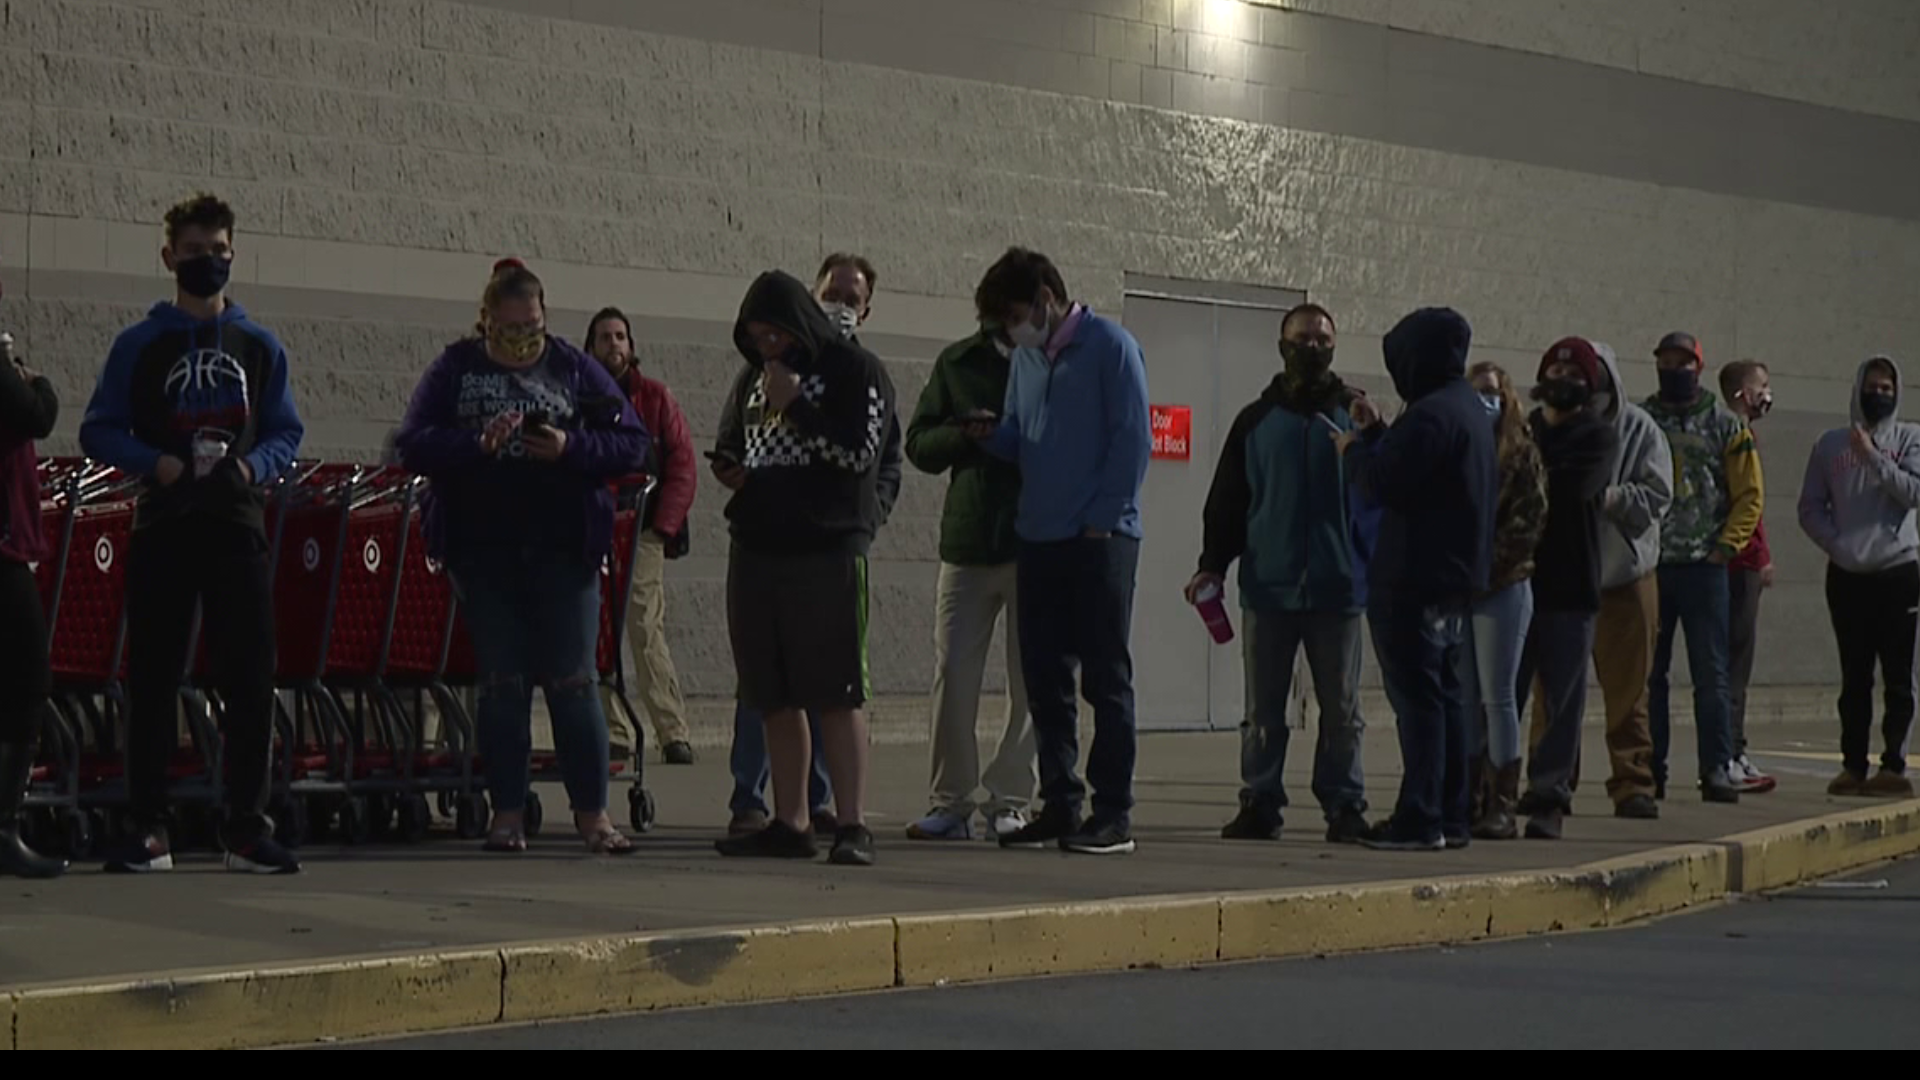 It was set to be a Black Friday unlike anything we've ever seen, but shoppers still camped out and waited in lines hoping they'd get lucky.